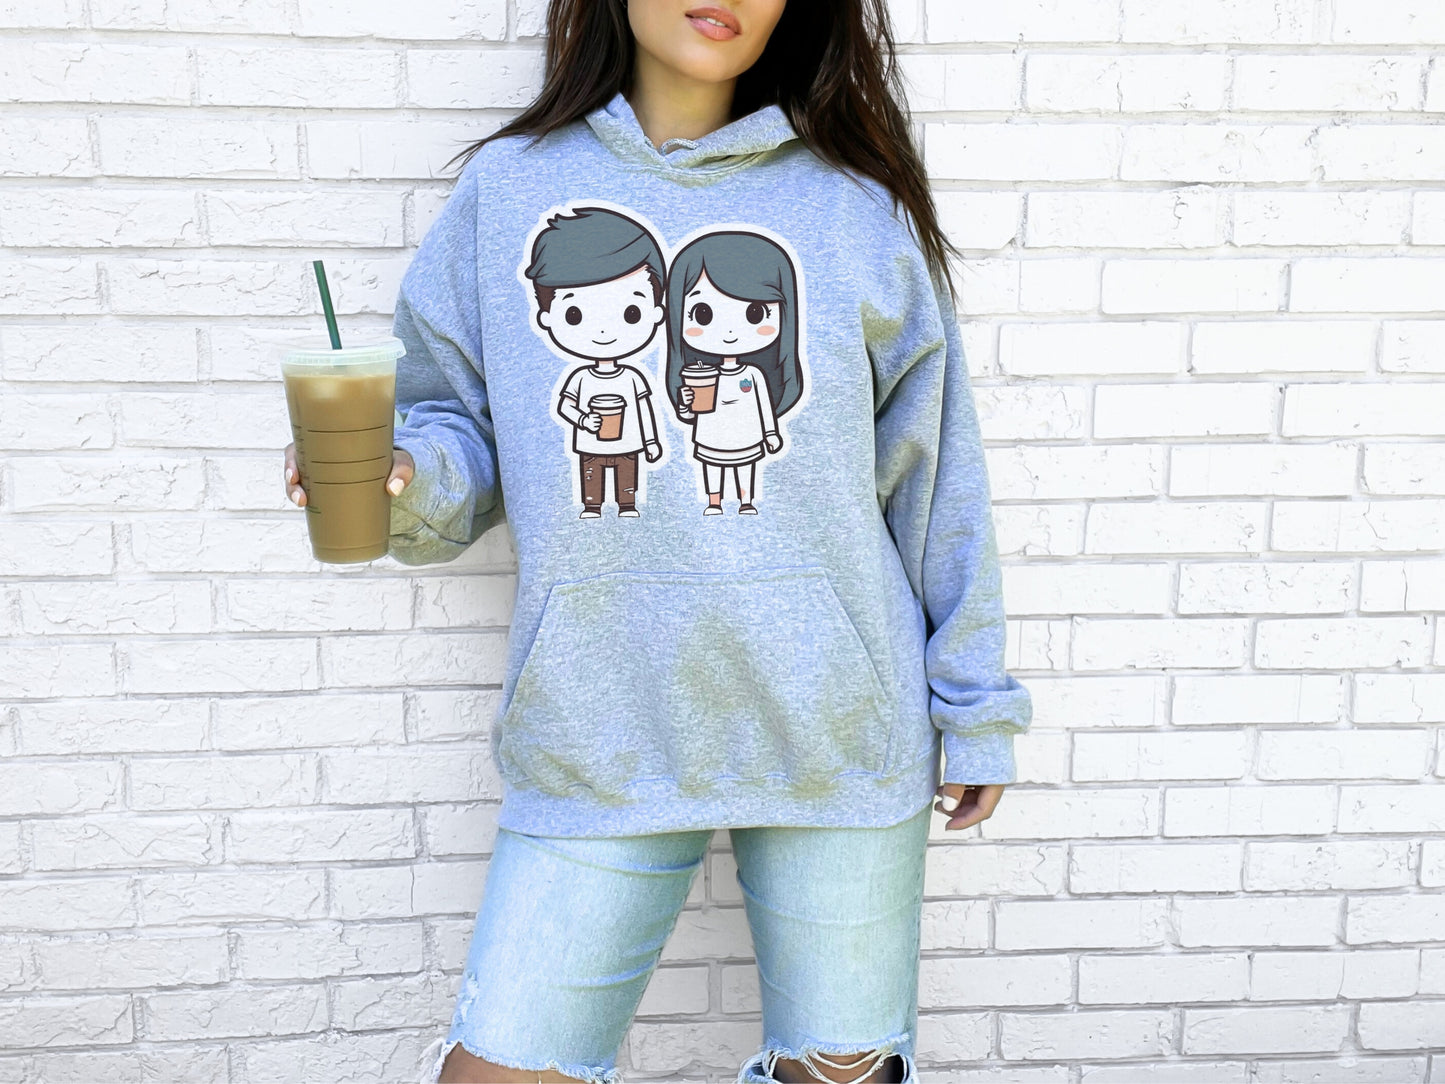 SHARING A BREW WITH MY BOO! CUTE COUPLE HOODIE FOR THE COFFEE LOVERS